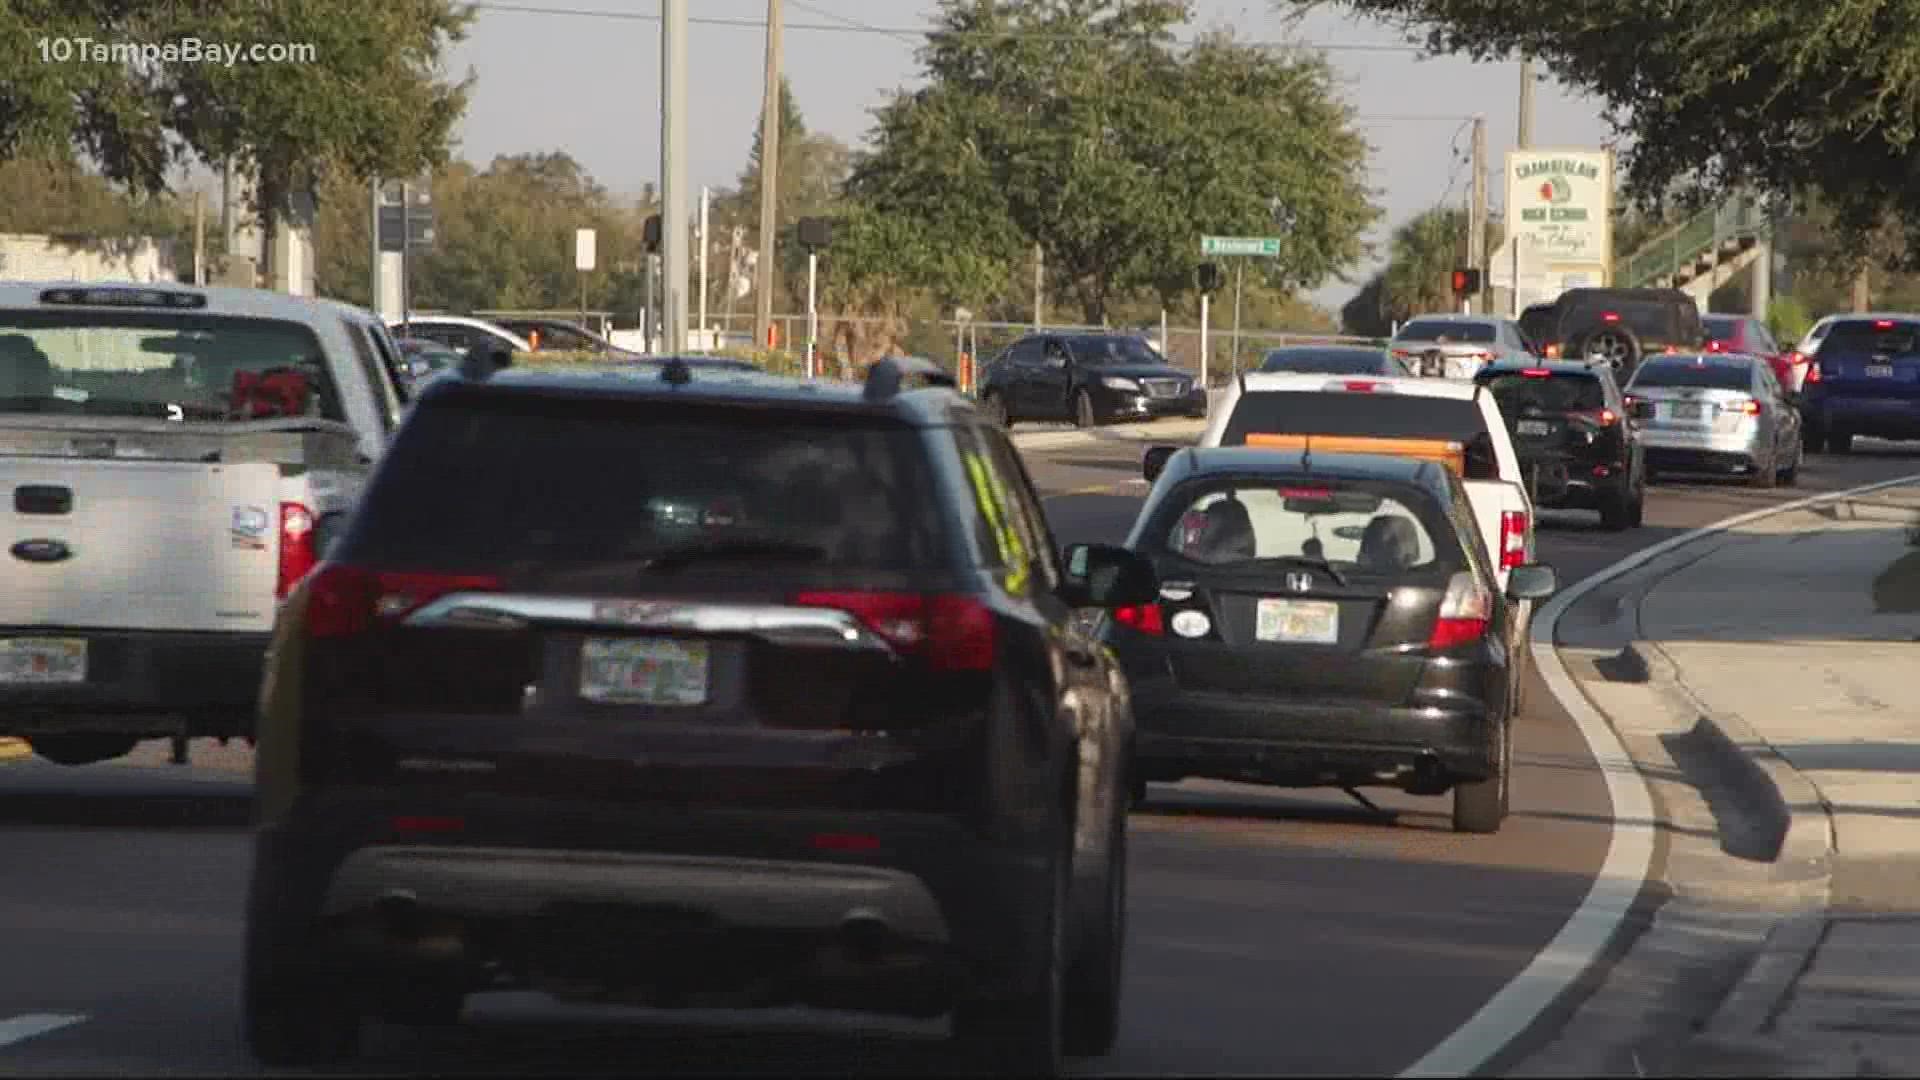 Transportation experts say Florida’s growing population could result in more crashes and deaths if leaders don’t take steps to address road improvements.